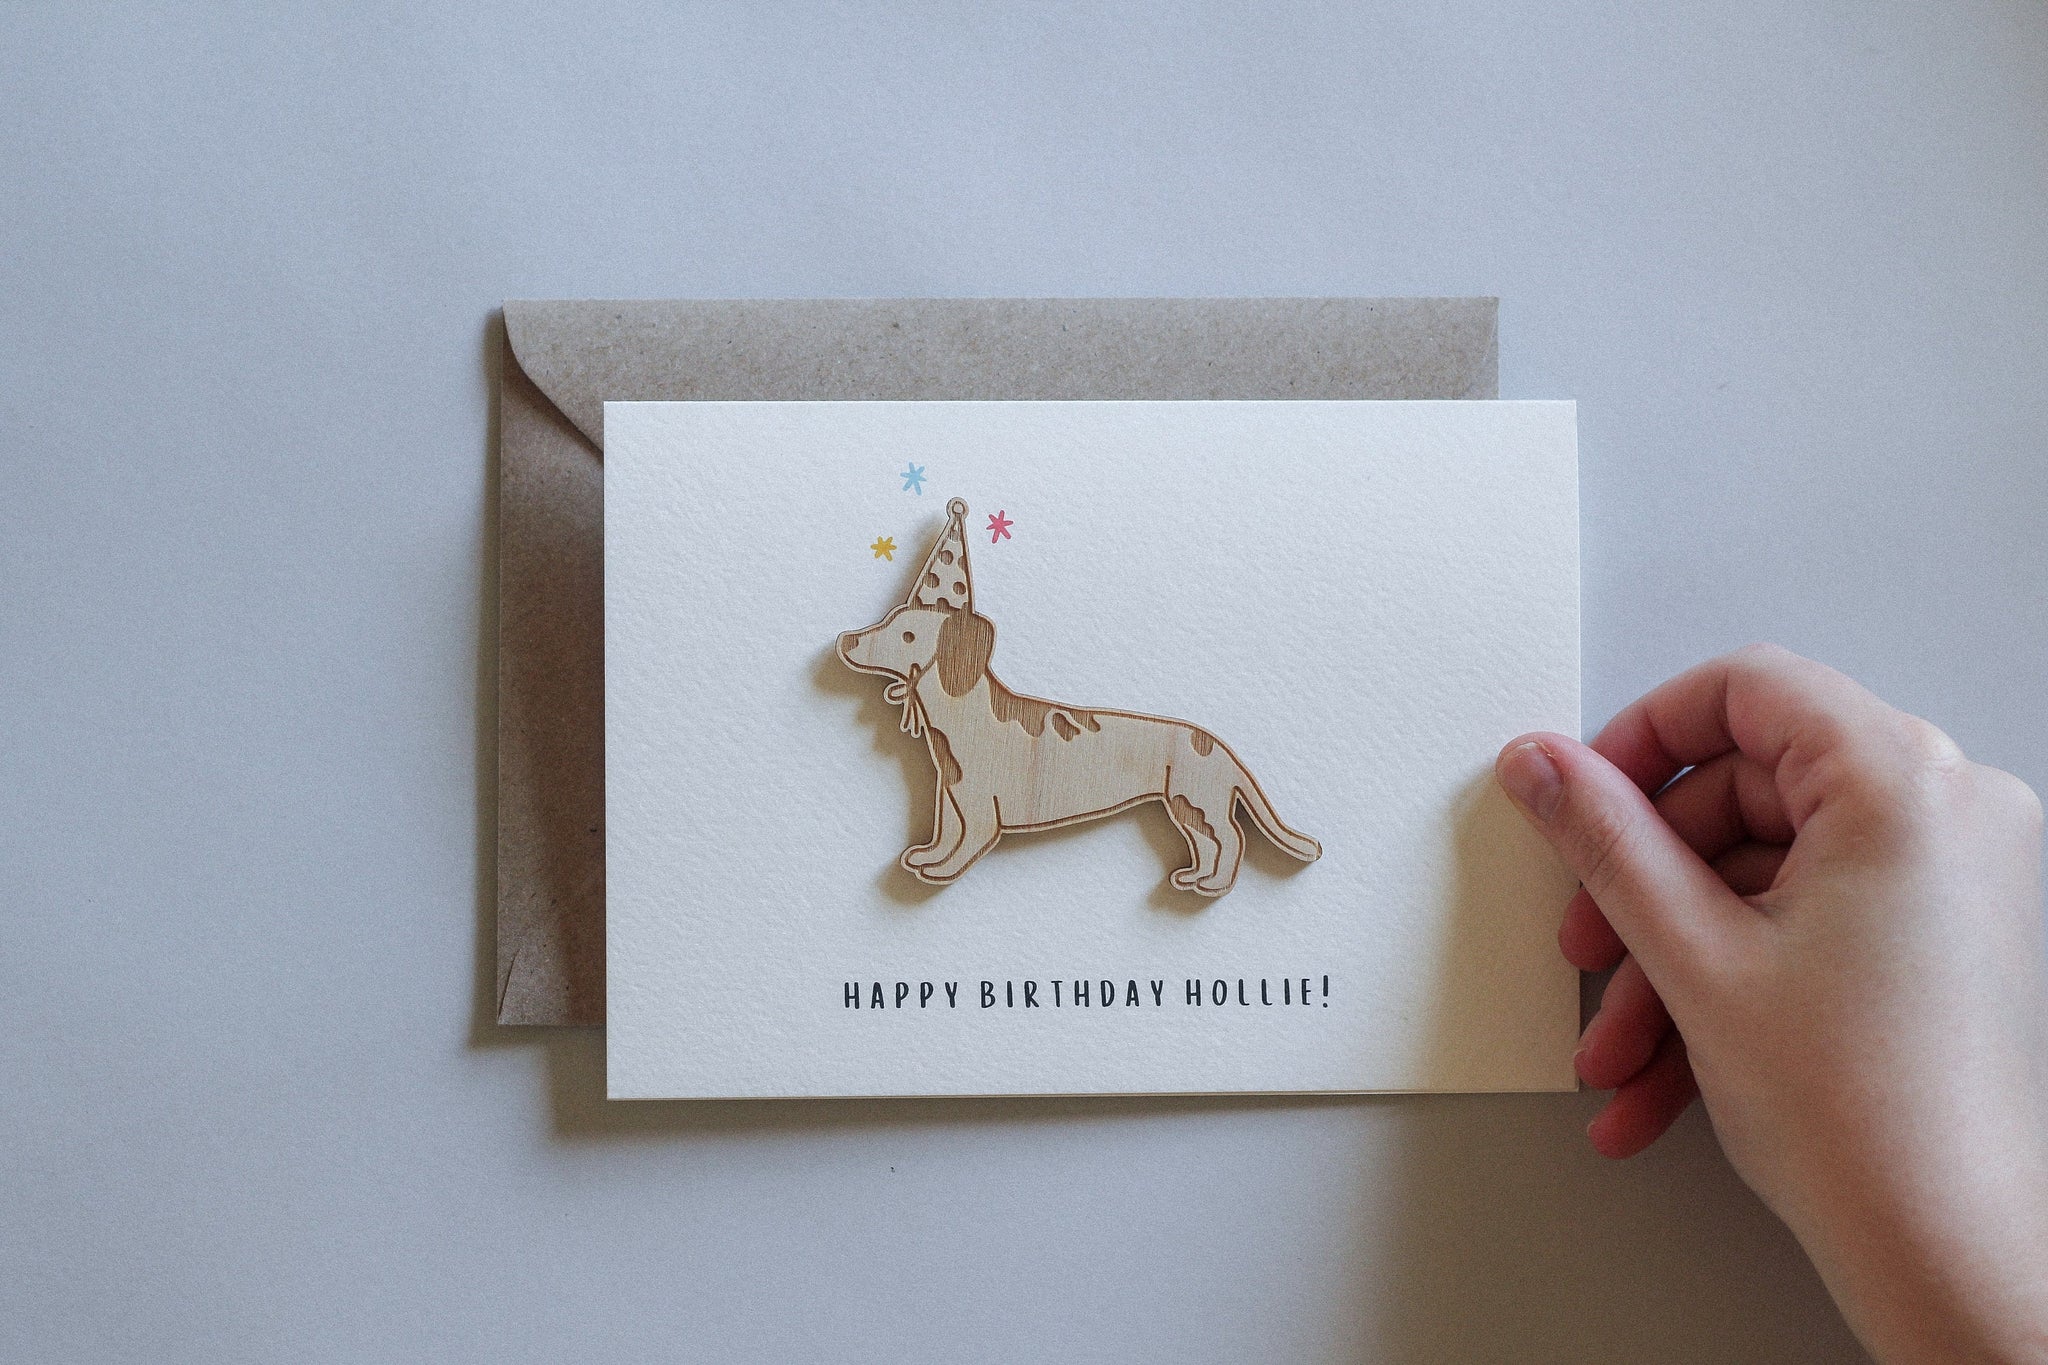 Personalised Sausage Dog Birthday Card | Celebration Card | Wooden Card